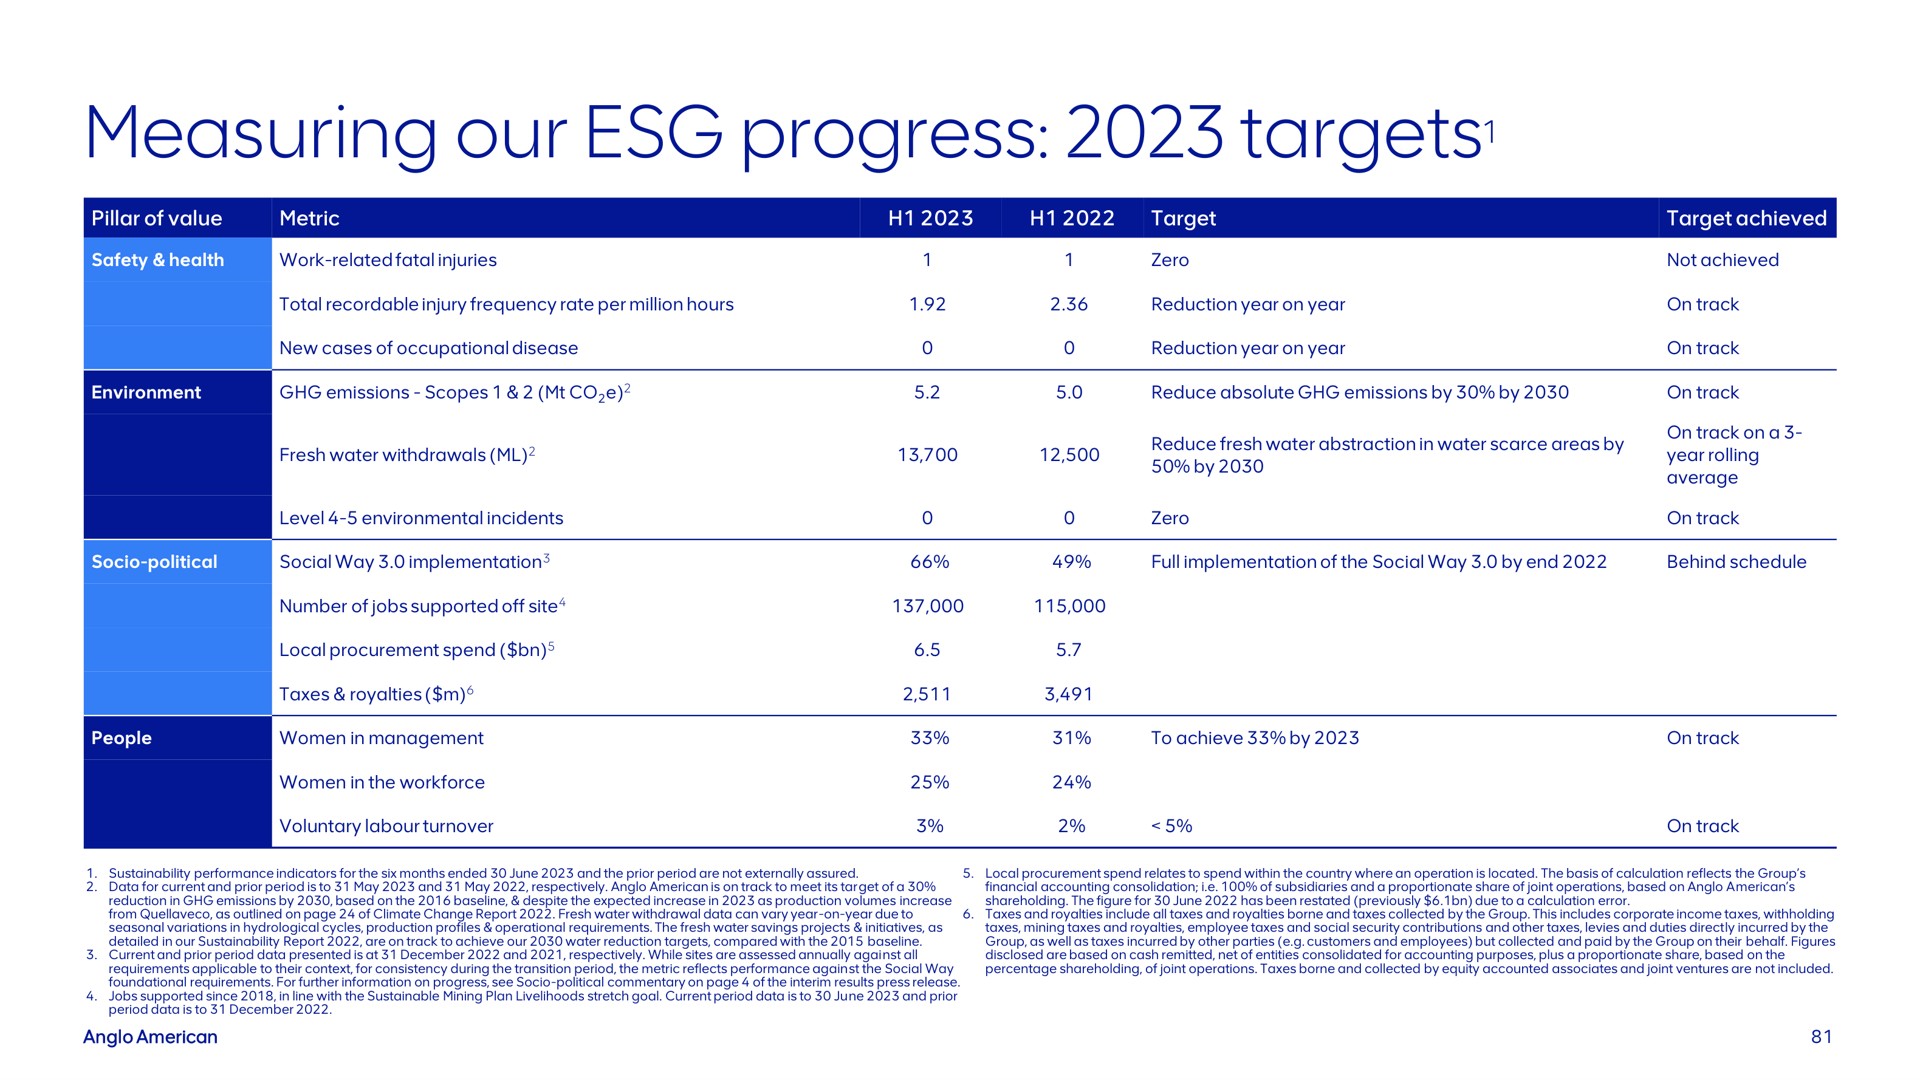 measuring our progress targets targets | AngloAmerican